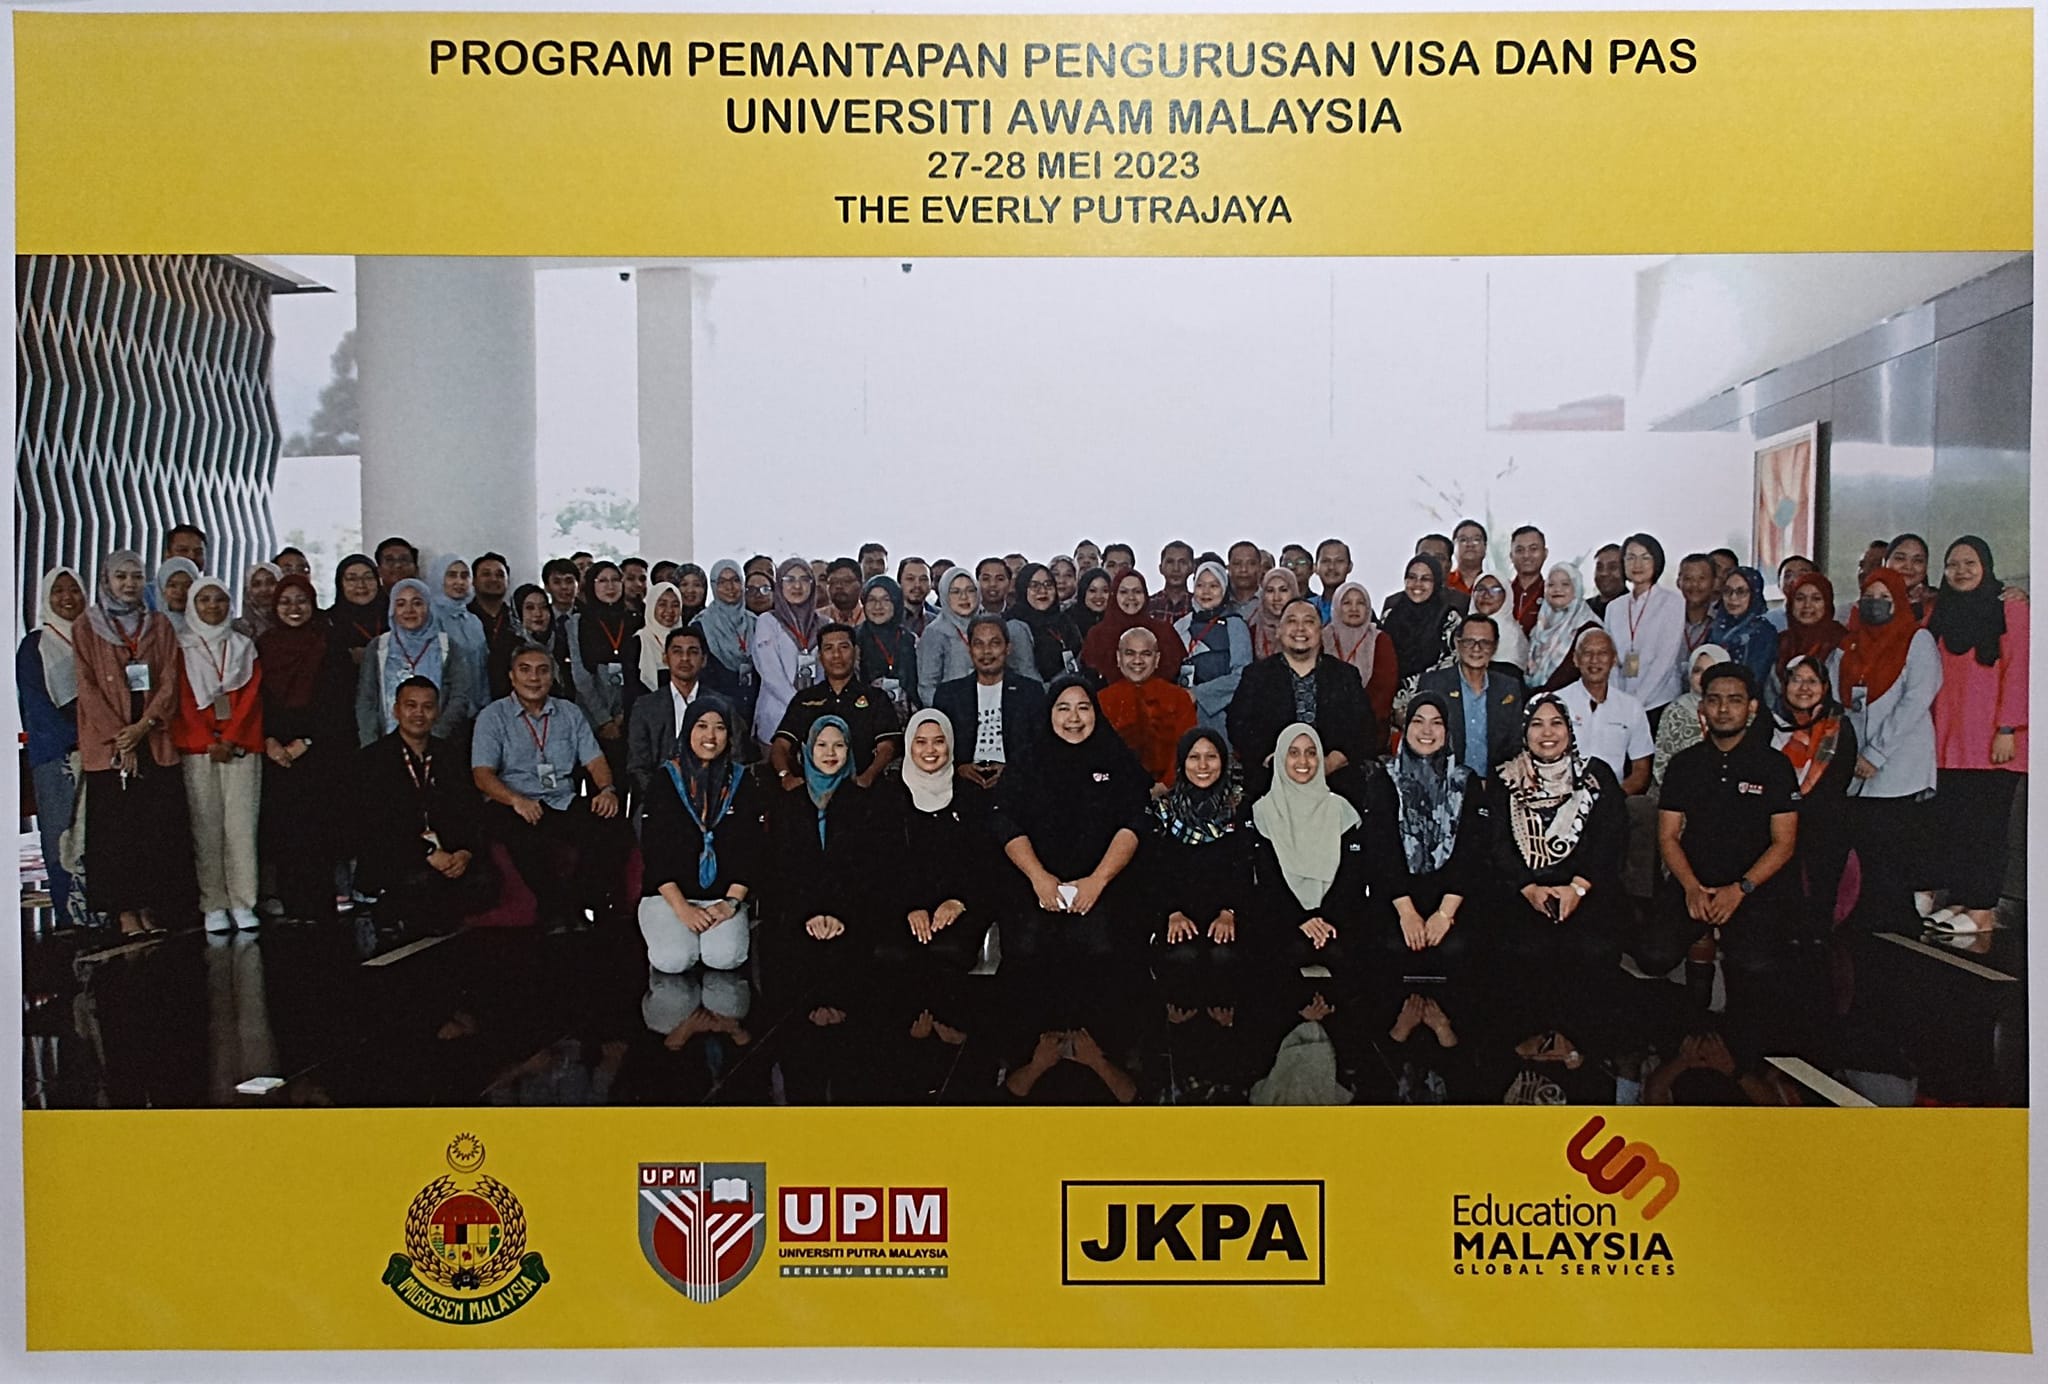 Workshop To Strengthen The Management of International Student Pass and Visa at Malaysia Public Universities